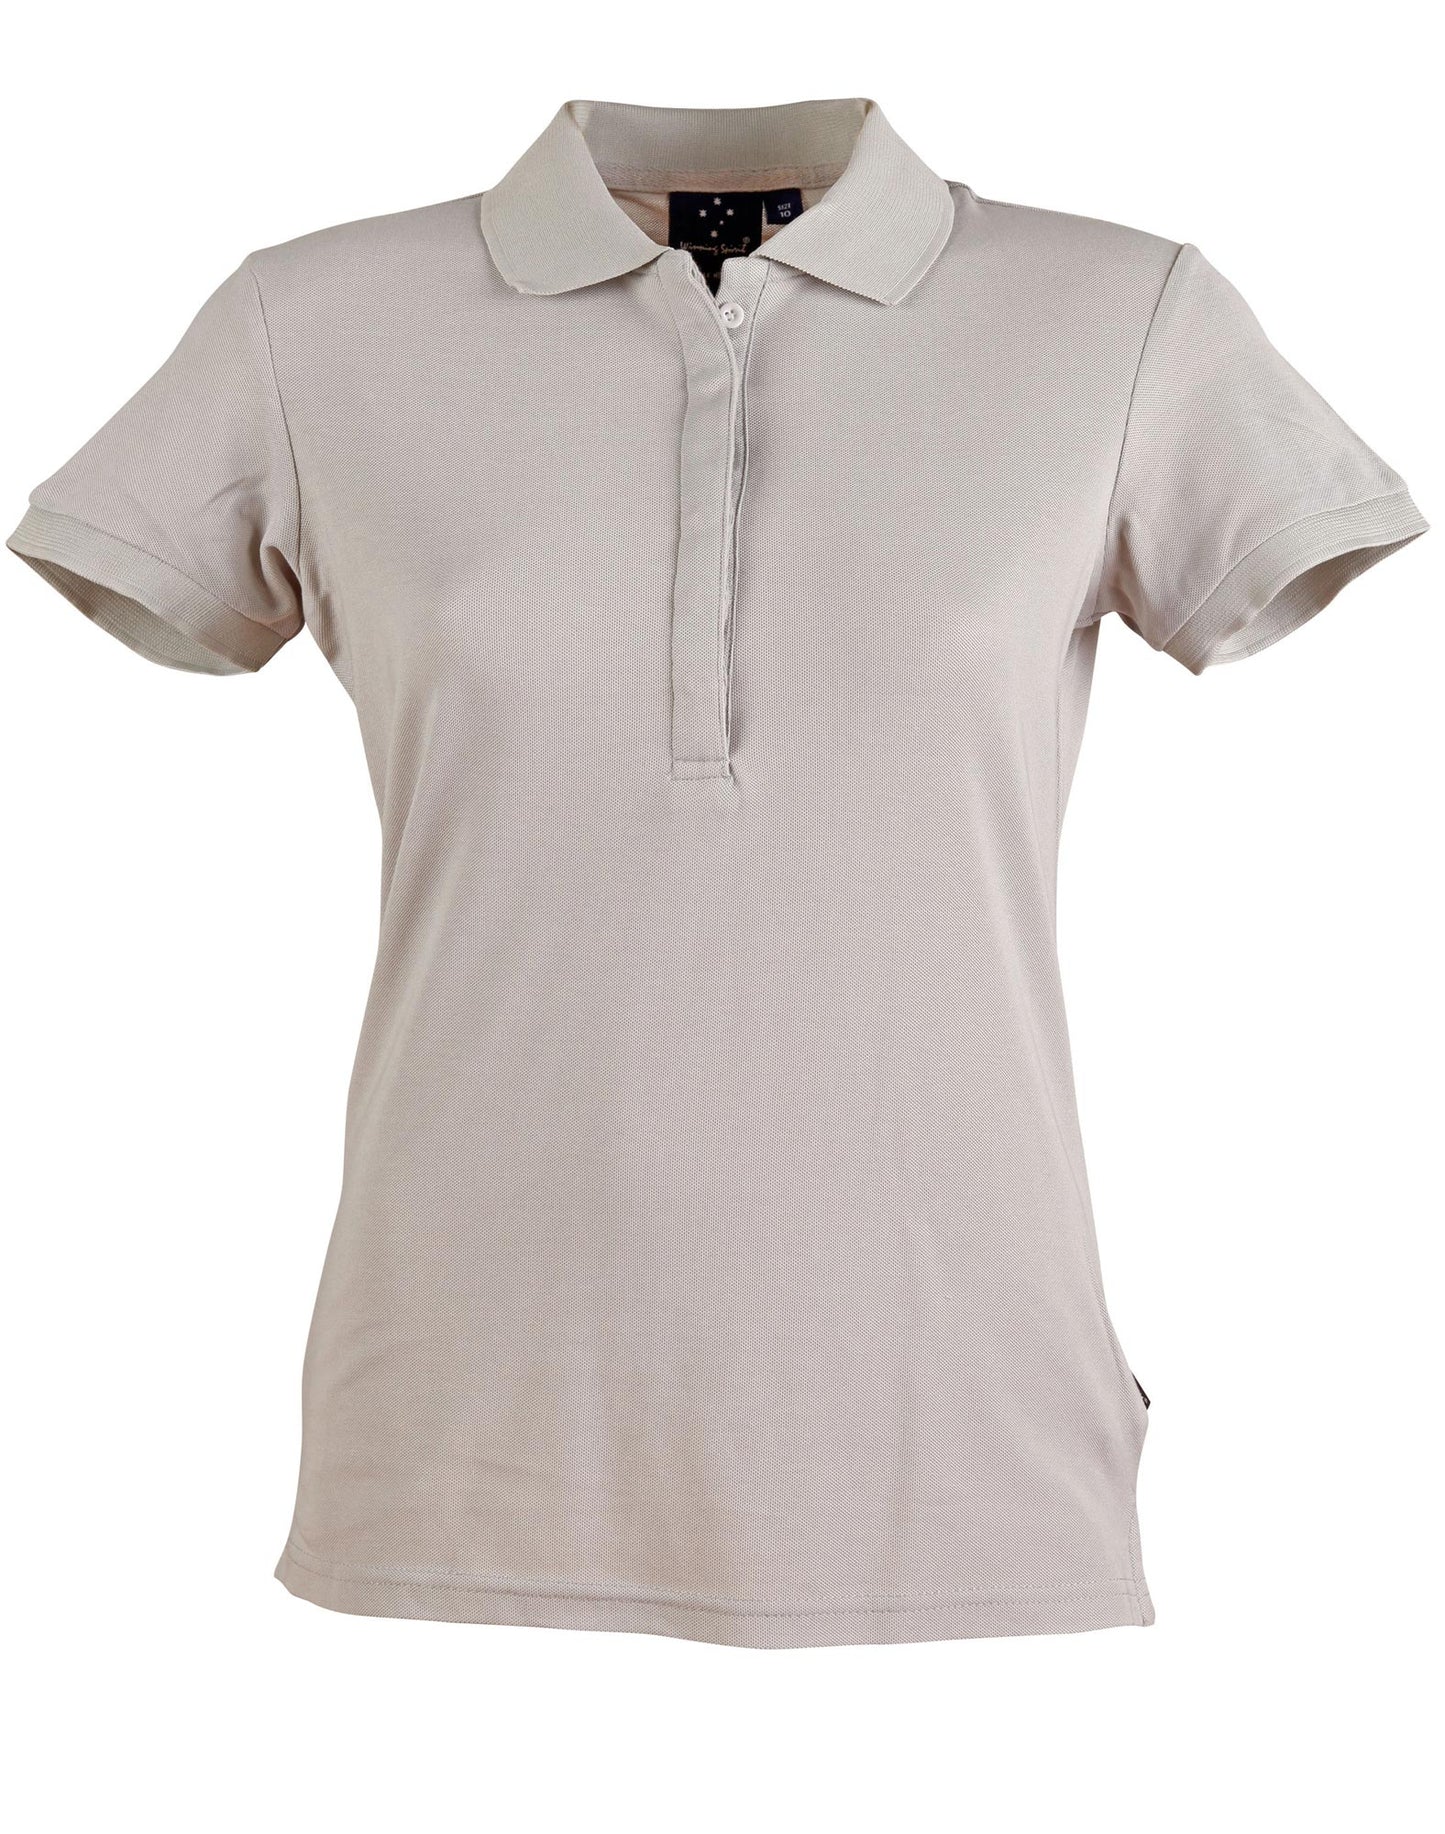 Ladies Truedry Short Sleeve Polo - made by AIW